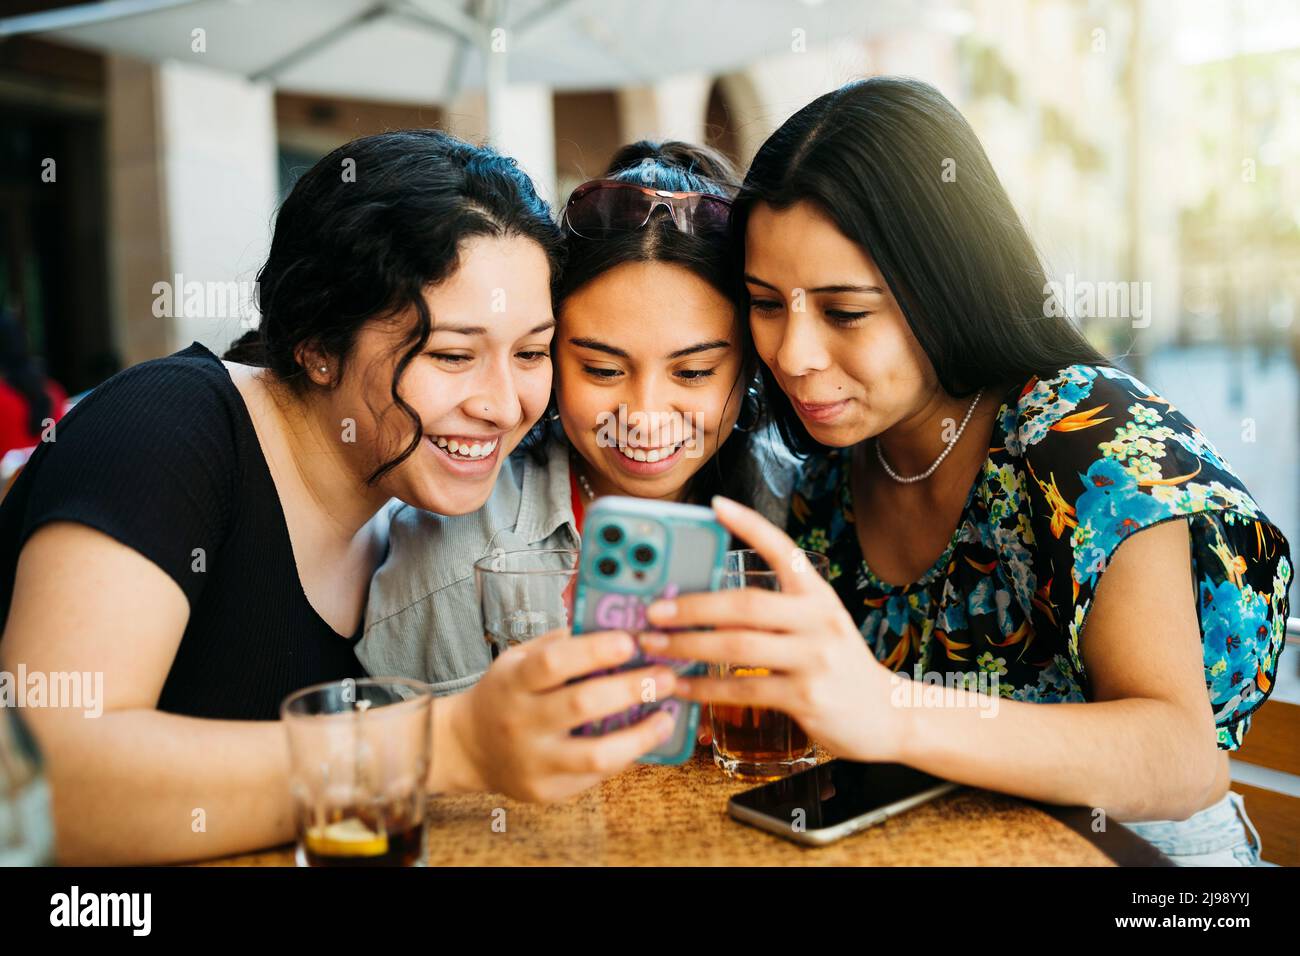 Three young women looking at a phone on terrace of a restaurant Stock Photo